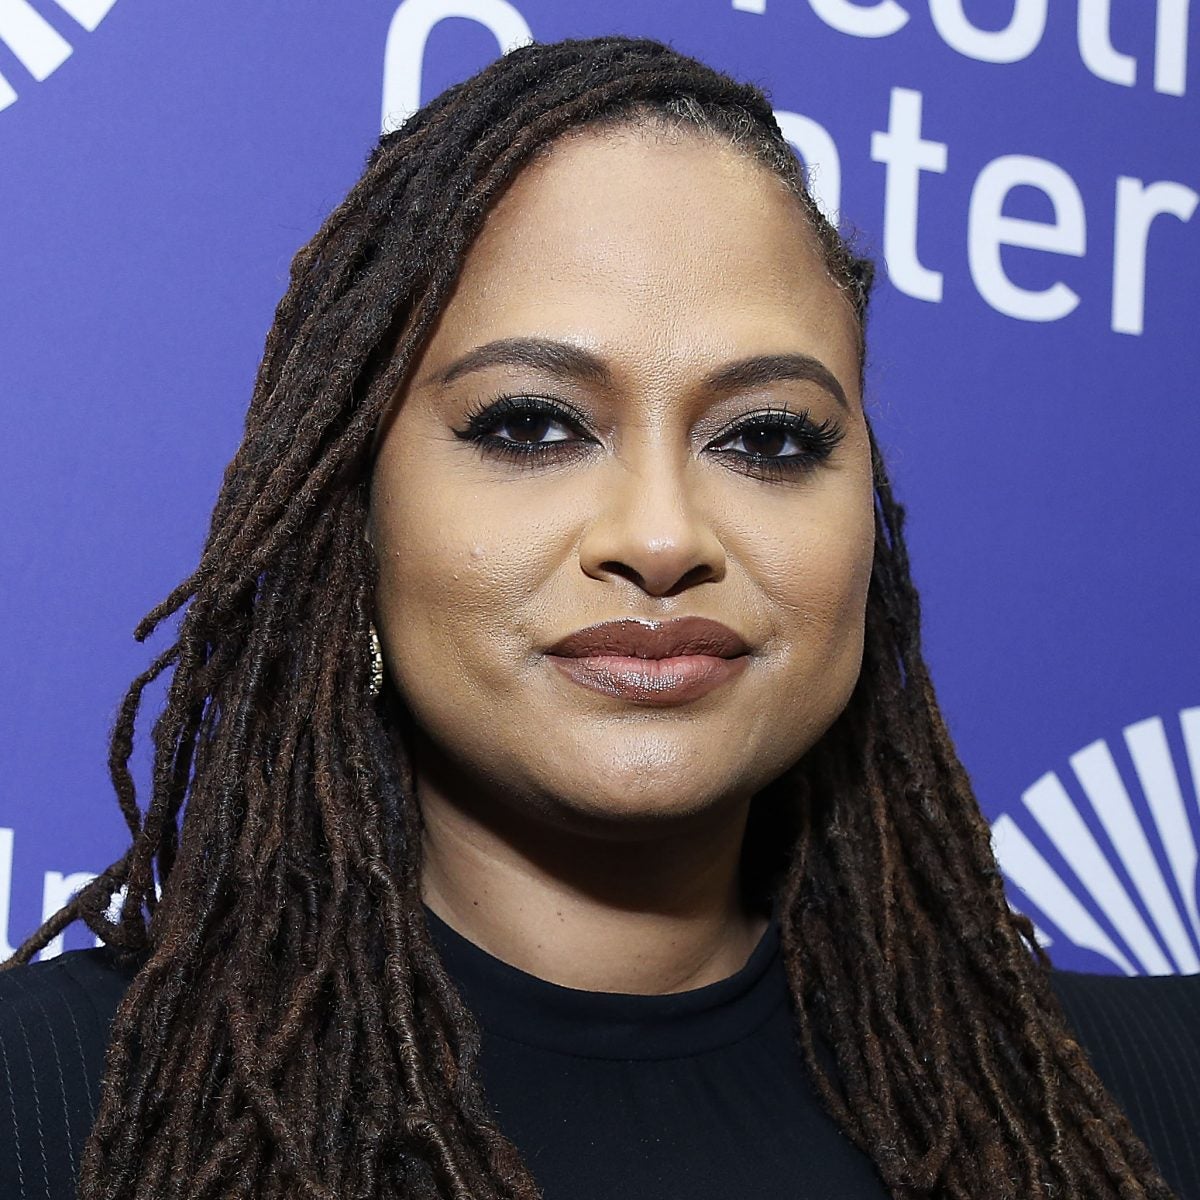 Ava DuVernay Is Promoting Wellness For Kids Through More Creative Learning